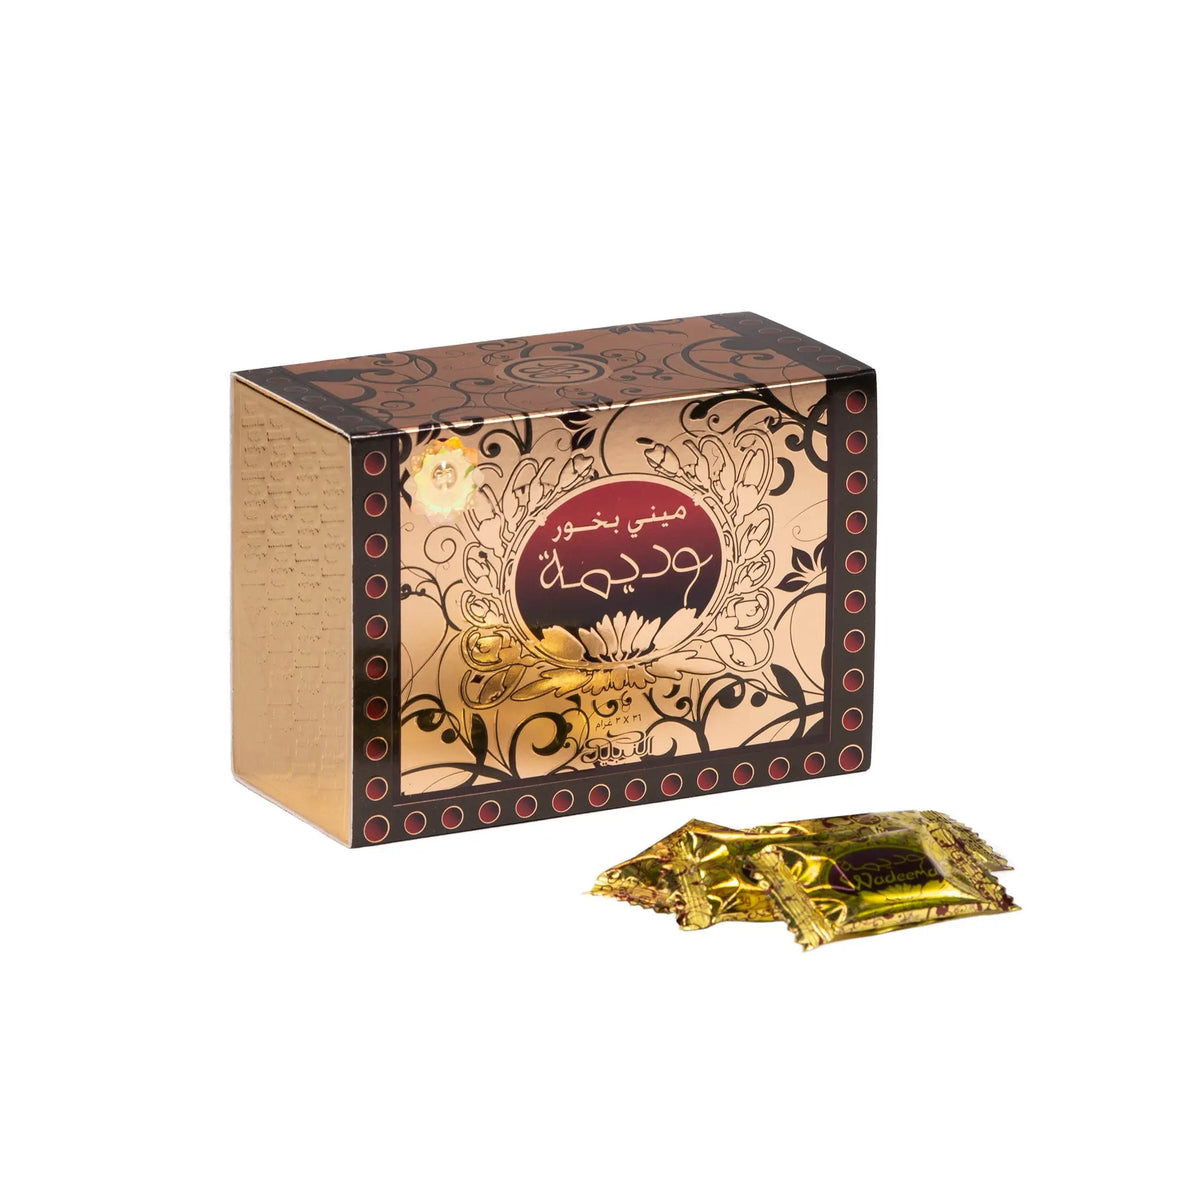 The image features a box for "Mini Wadeema Bakhoor" from Nabeel Perfumes. The box has a dark brown background with elaborate golden floral patterns and a central maroon label with Arabic script and the product name in English. The left side of the box is gold with embossed Arabic script. In front of the box lie several small, sealed golden packets with what appears to be the same name and branding as the box.